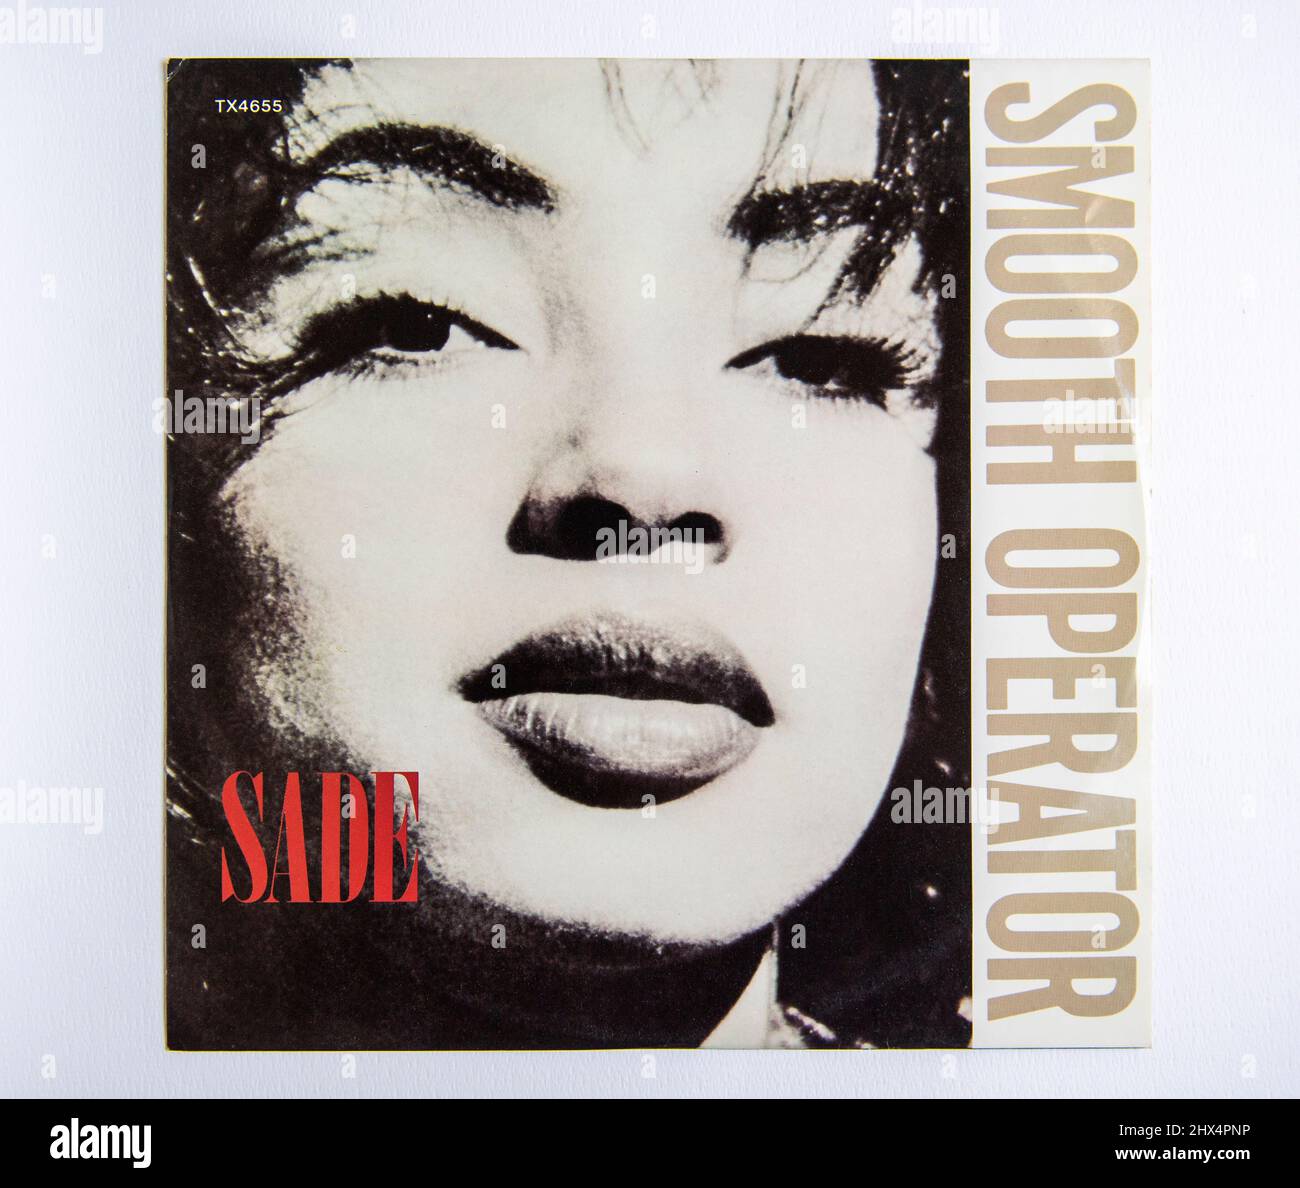 https://c8.alamy.com/comp/2HX4PNP/picture-cover-of-the-12-inch-single-version-of-smooth-operator-by-sade-which-was-released-in-1984-2HX4PNP.jpg